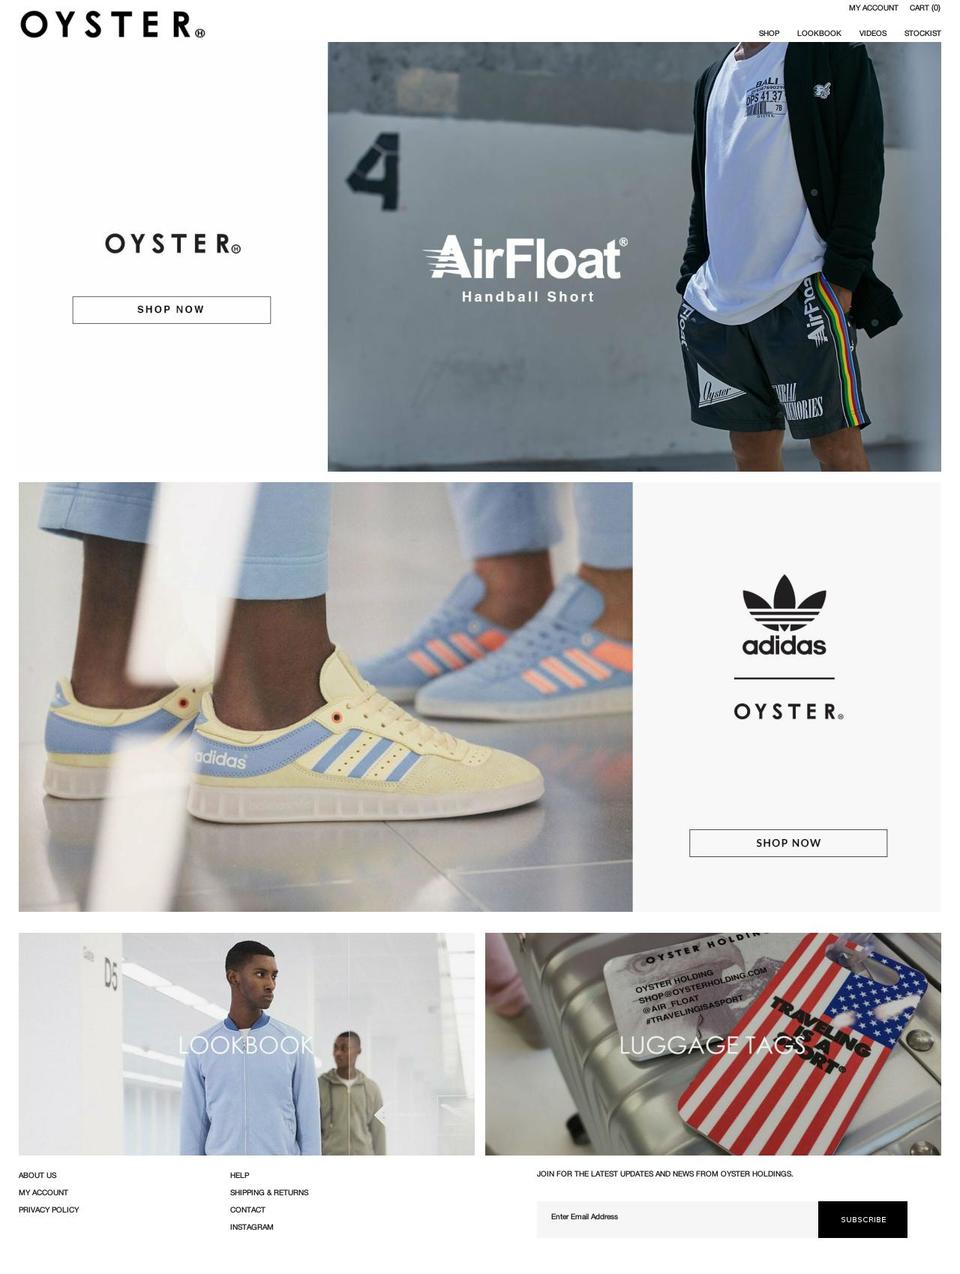 OYSTER x PG - HYPE Shopify theme site example oyster.clothing